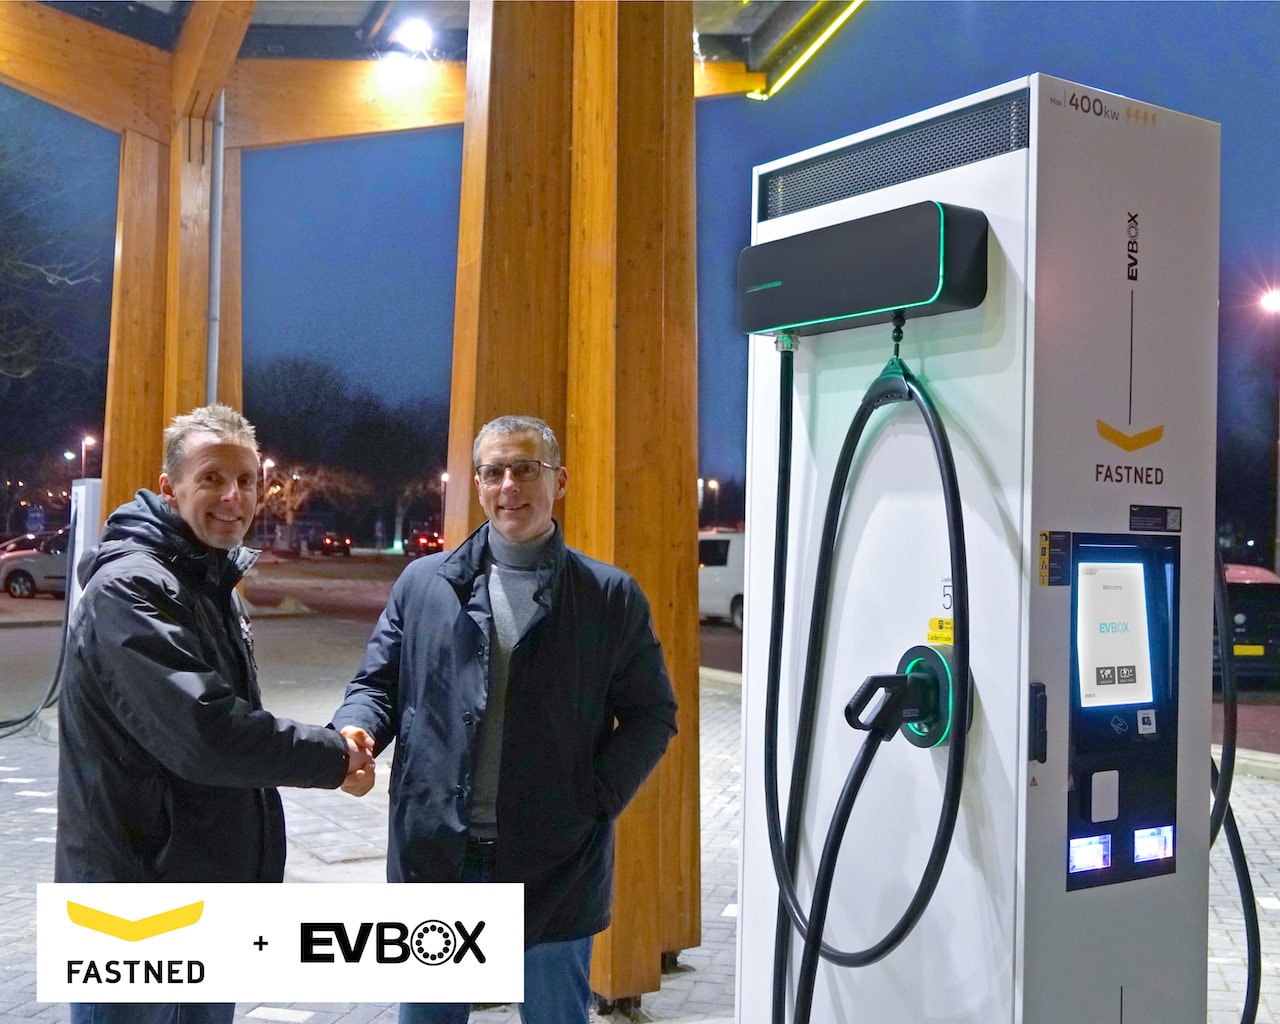 Fastned and EVBox Join Forces to Install One the First 400 kW EV Fast Chargers in Europe